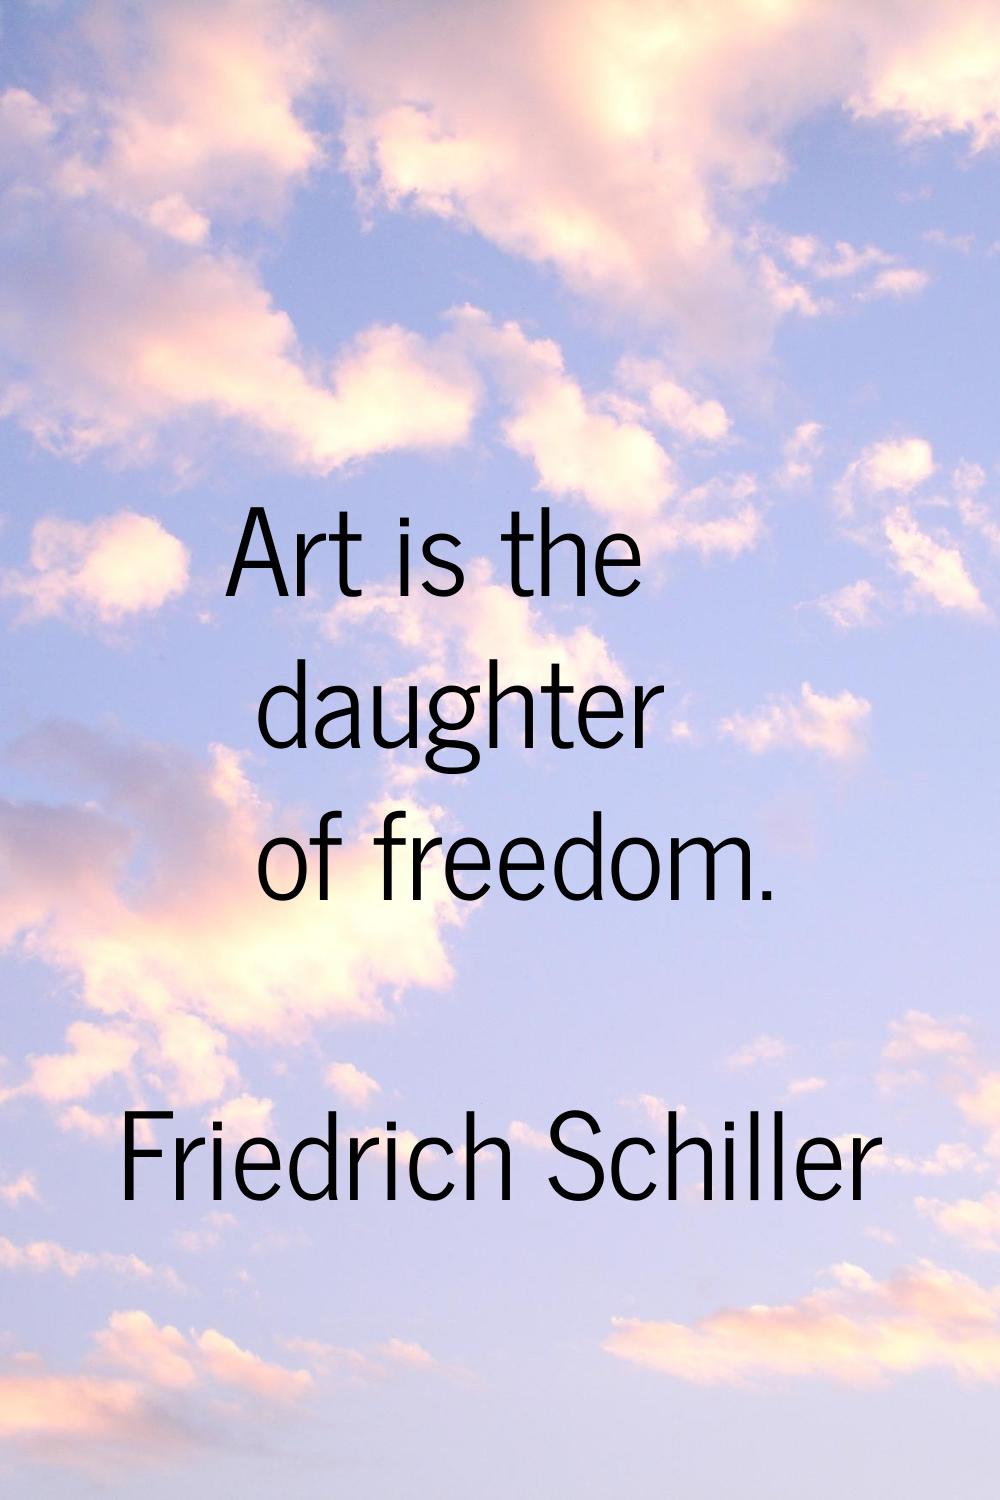 Art is the daughter of freedom.